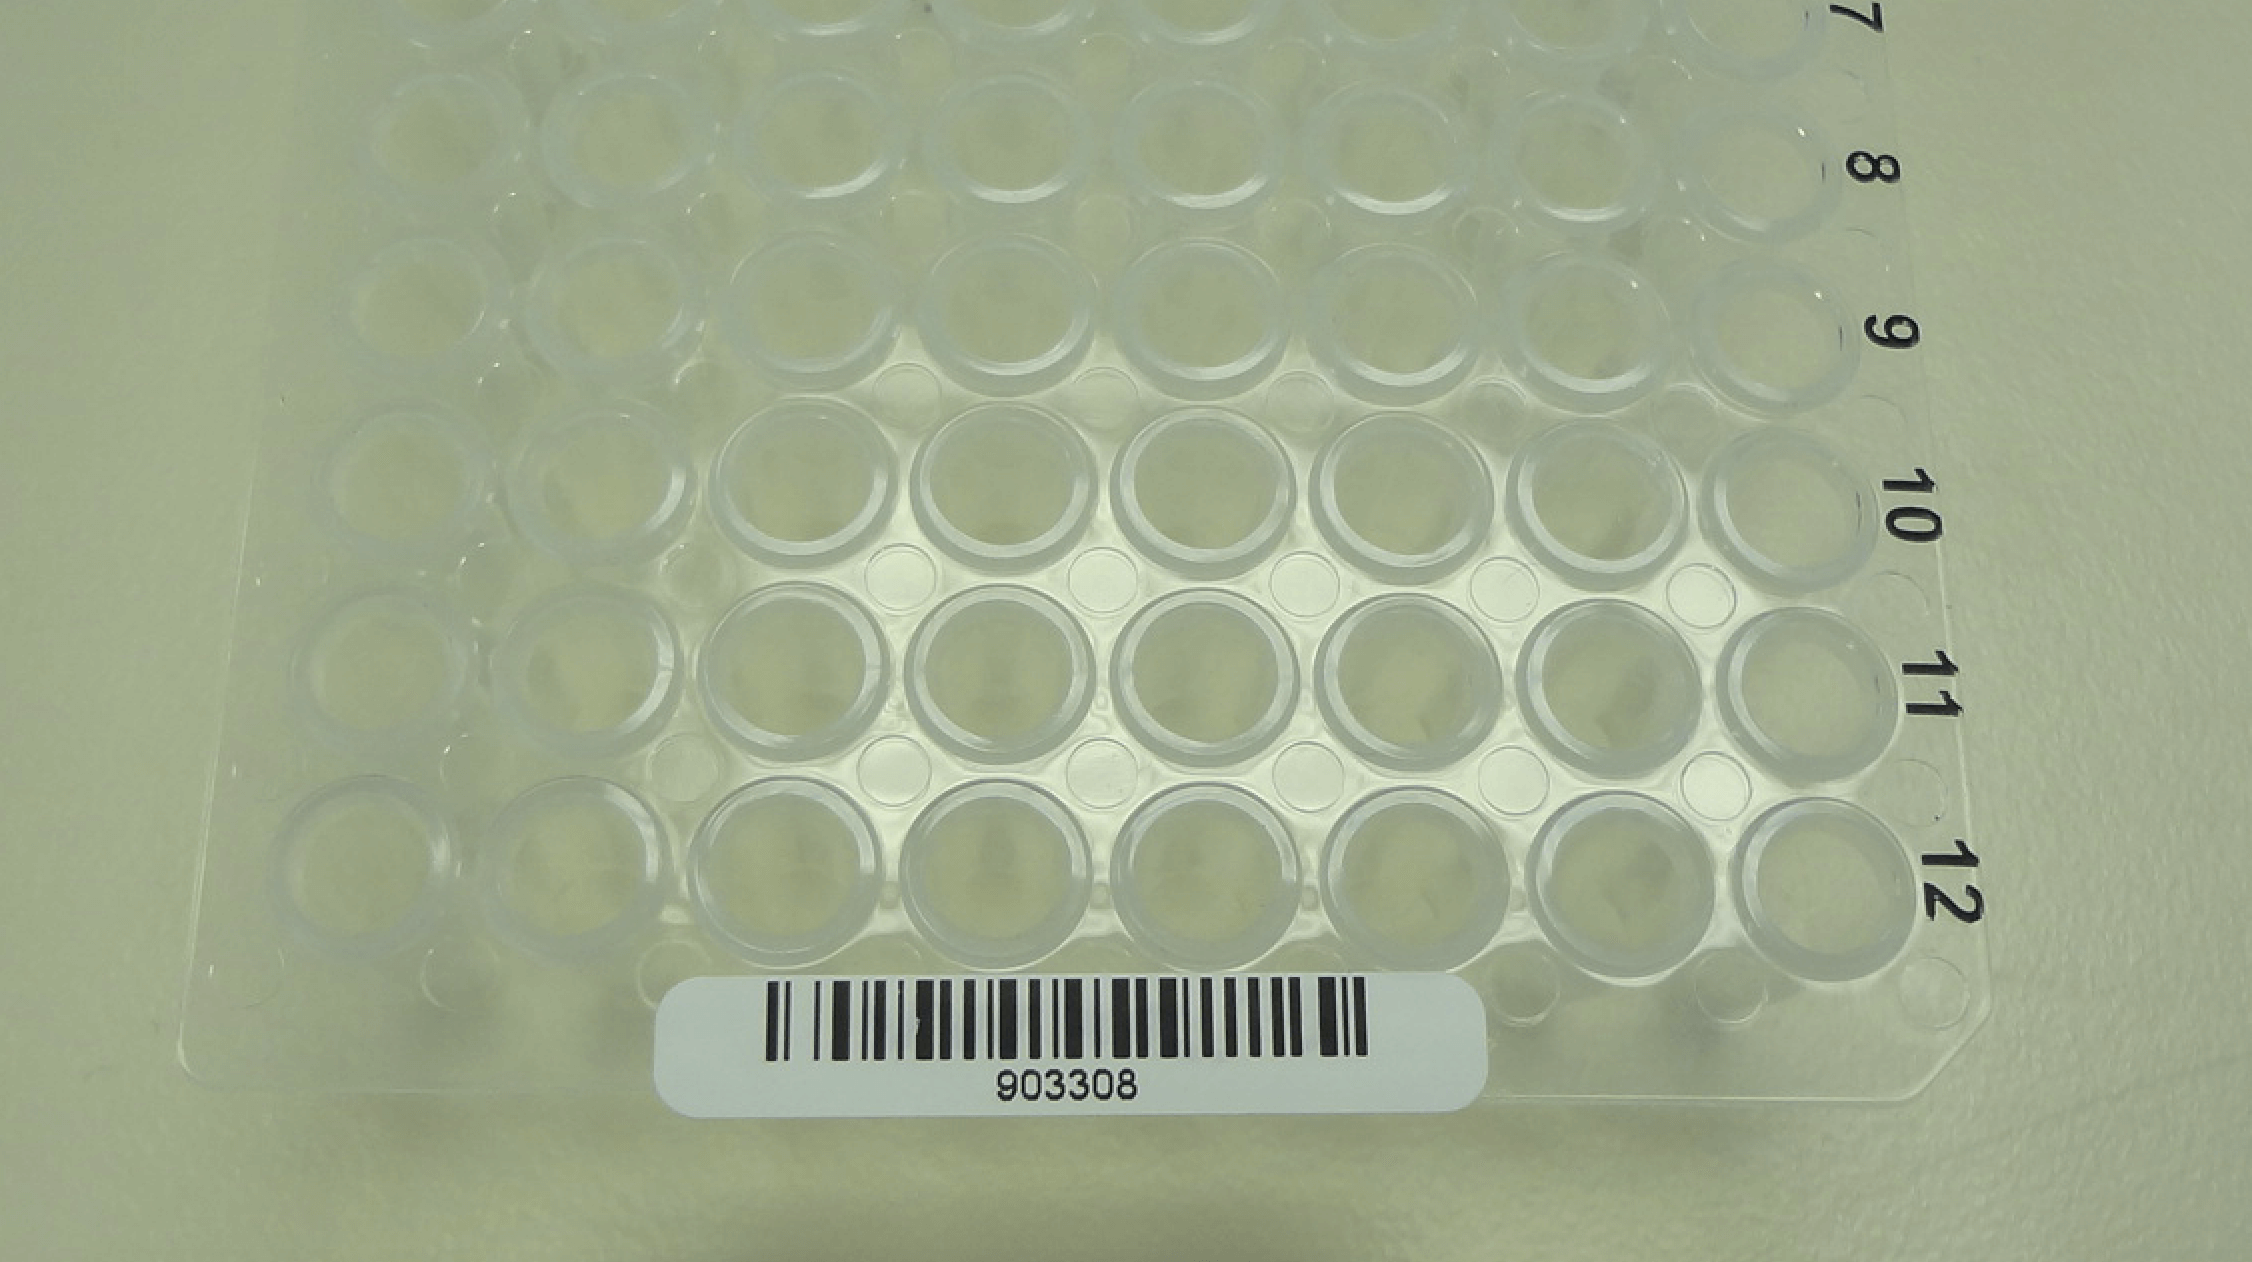 Cryogenic Labels